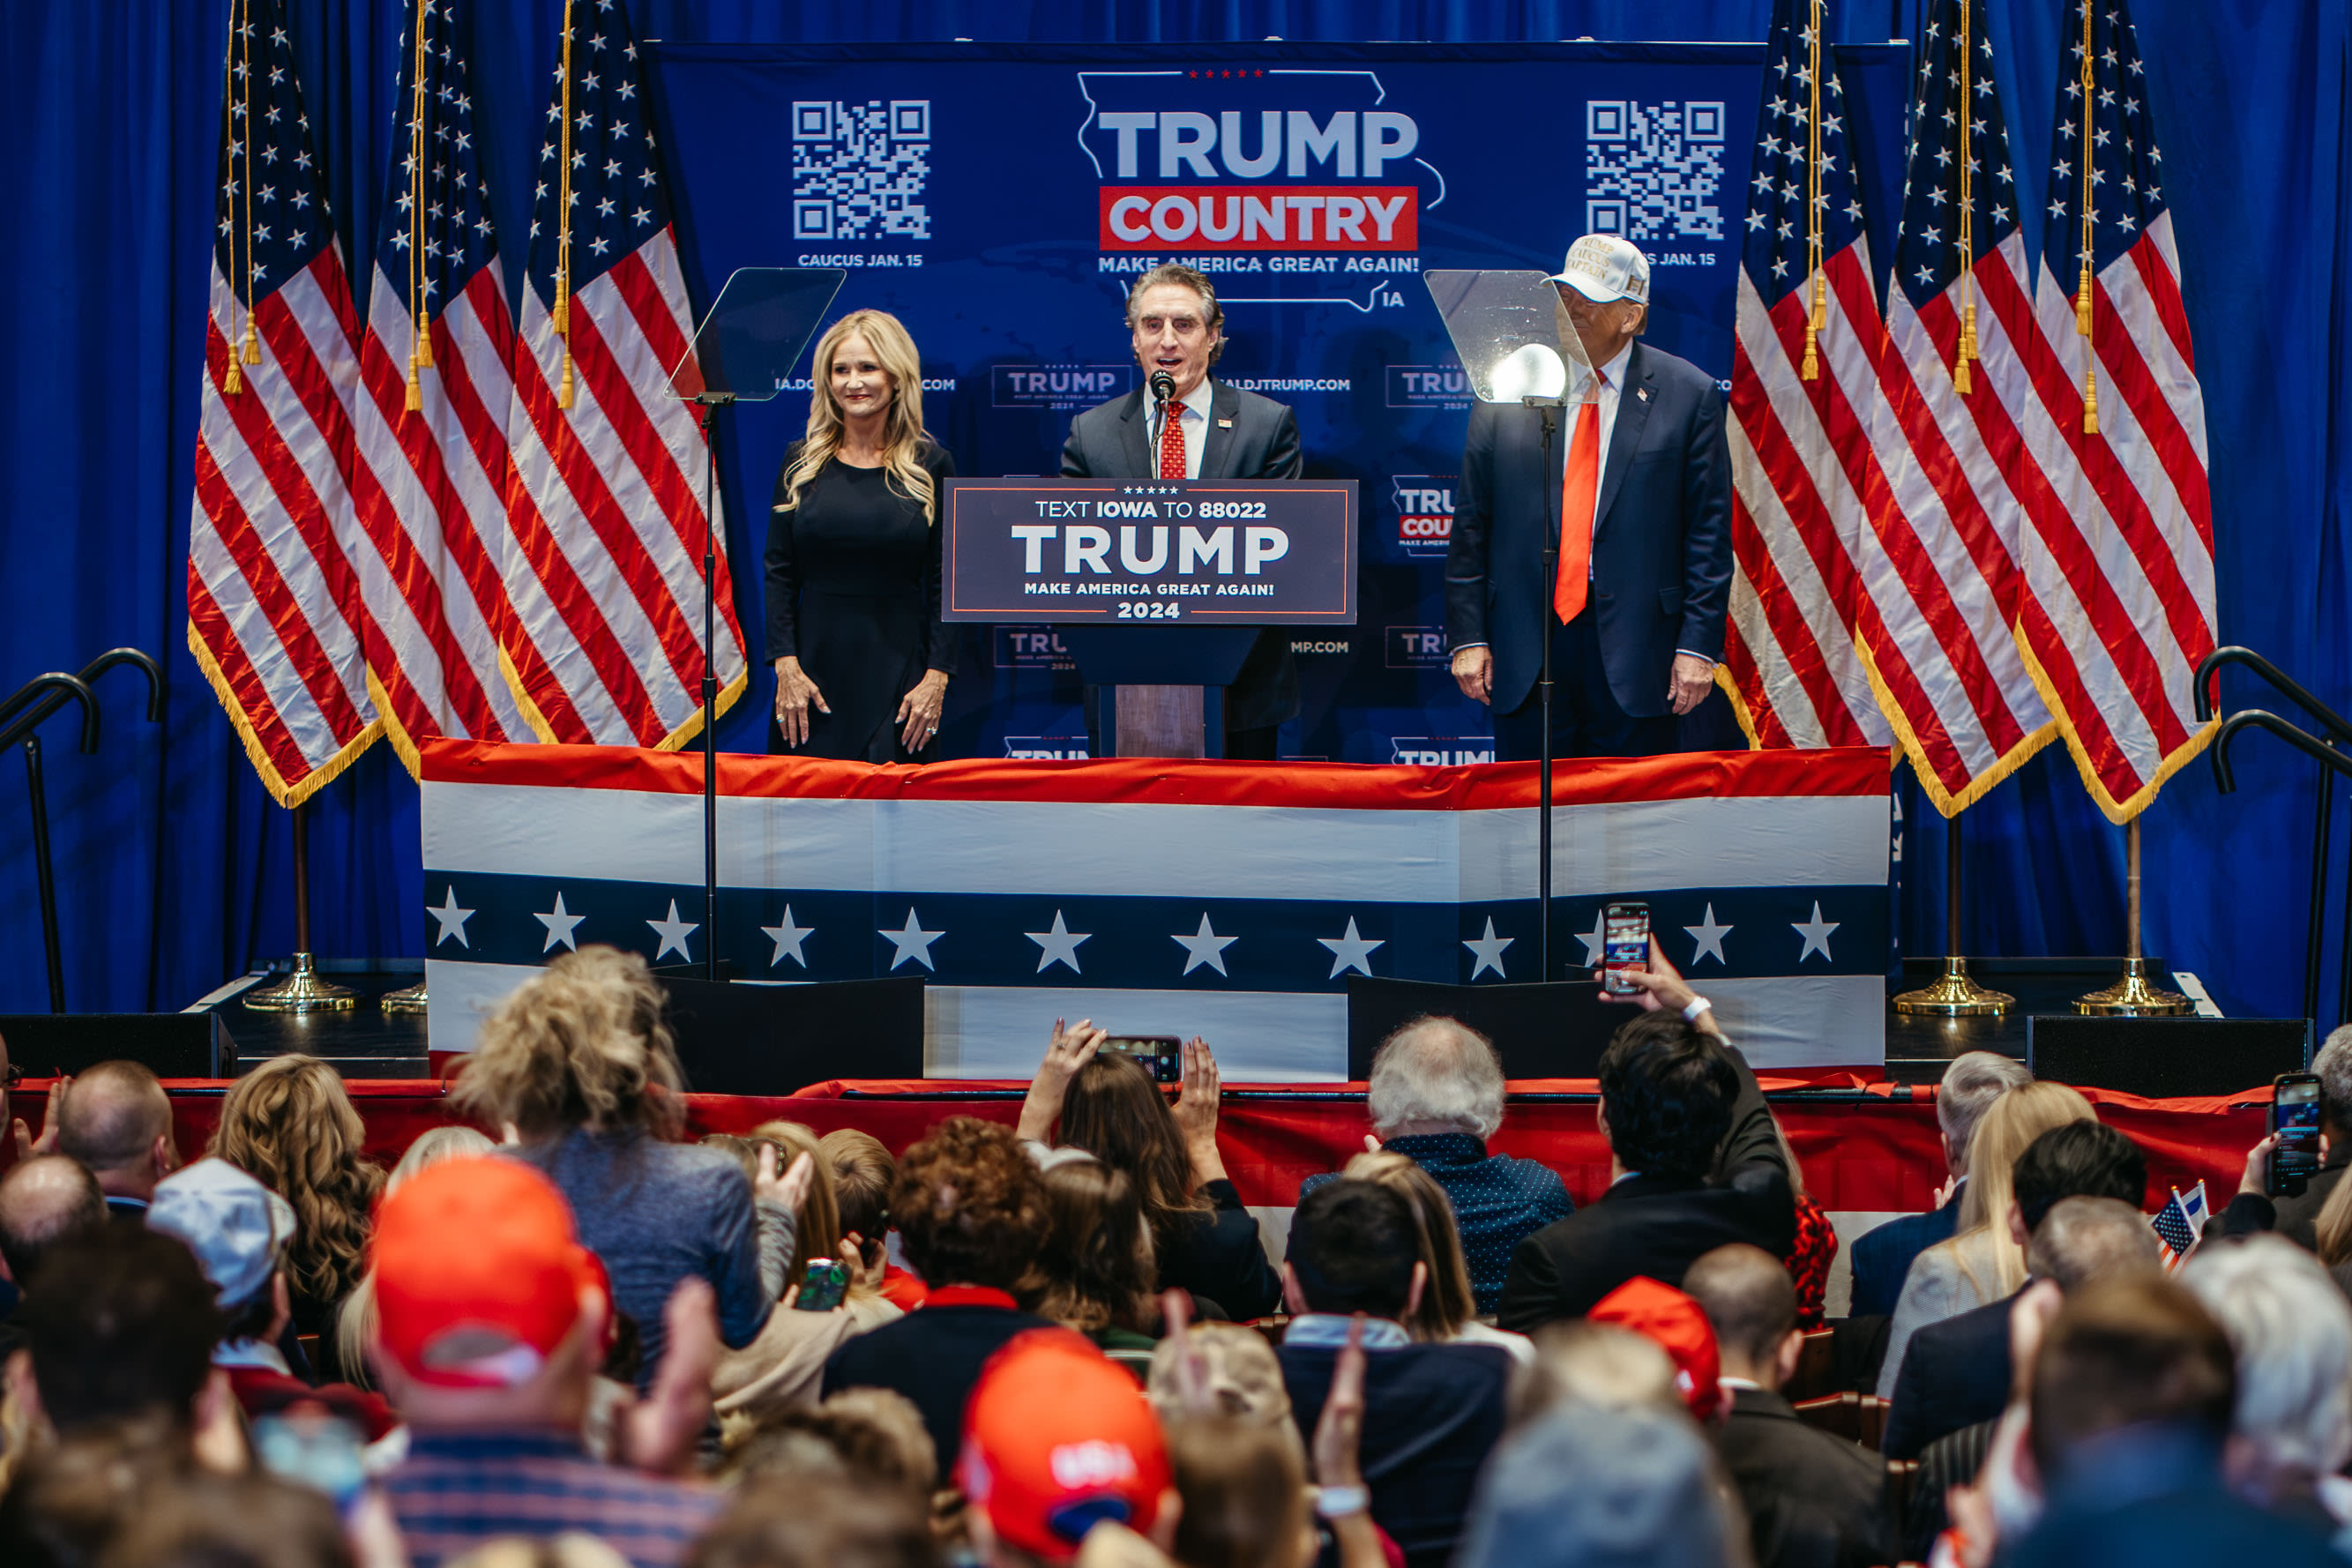 Doug Burgum emerges as an unlikely candidate to be Trump VP